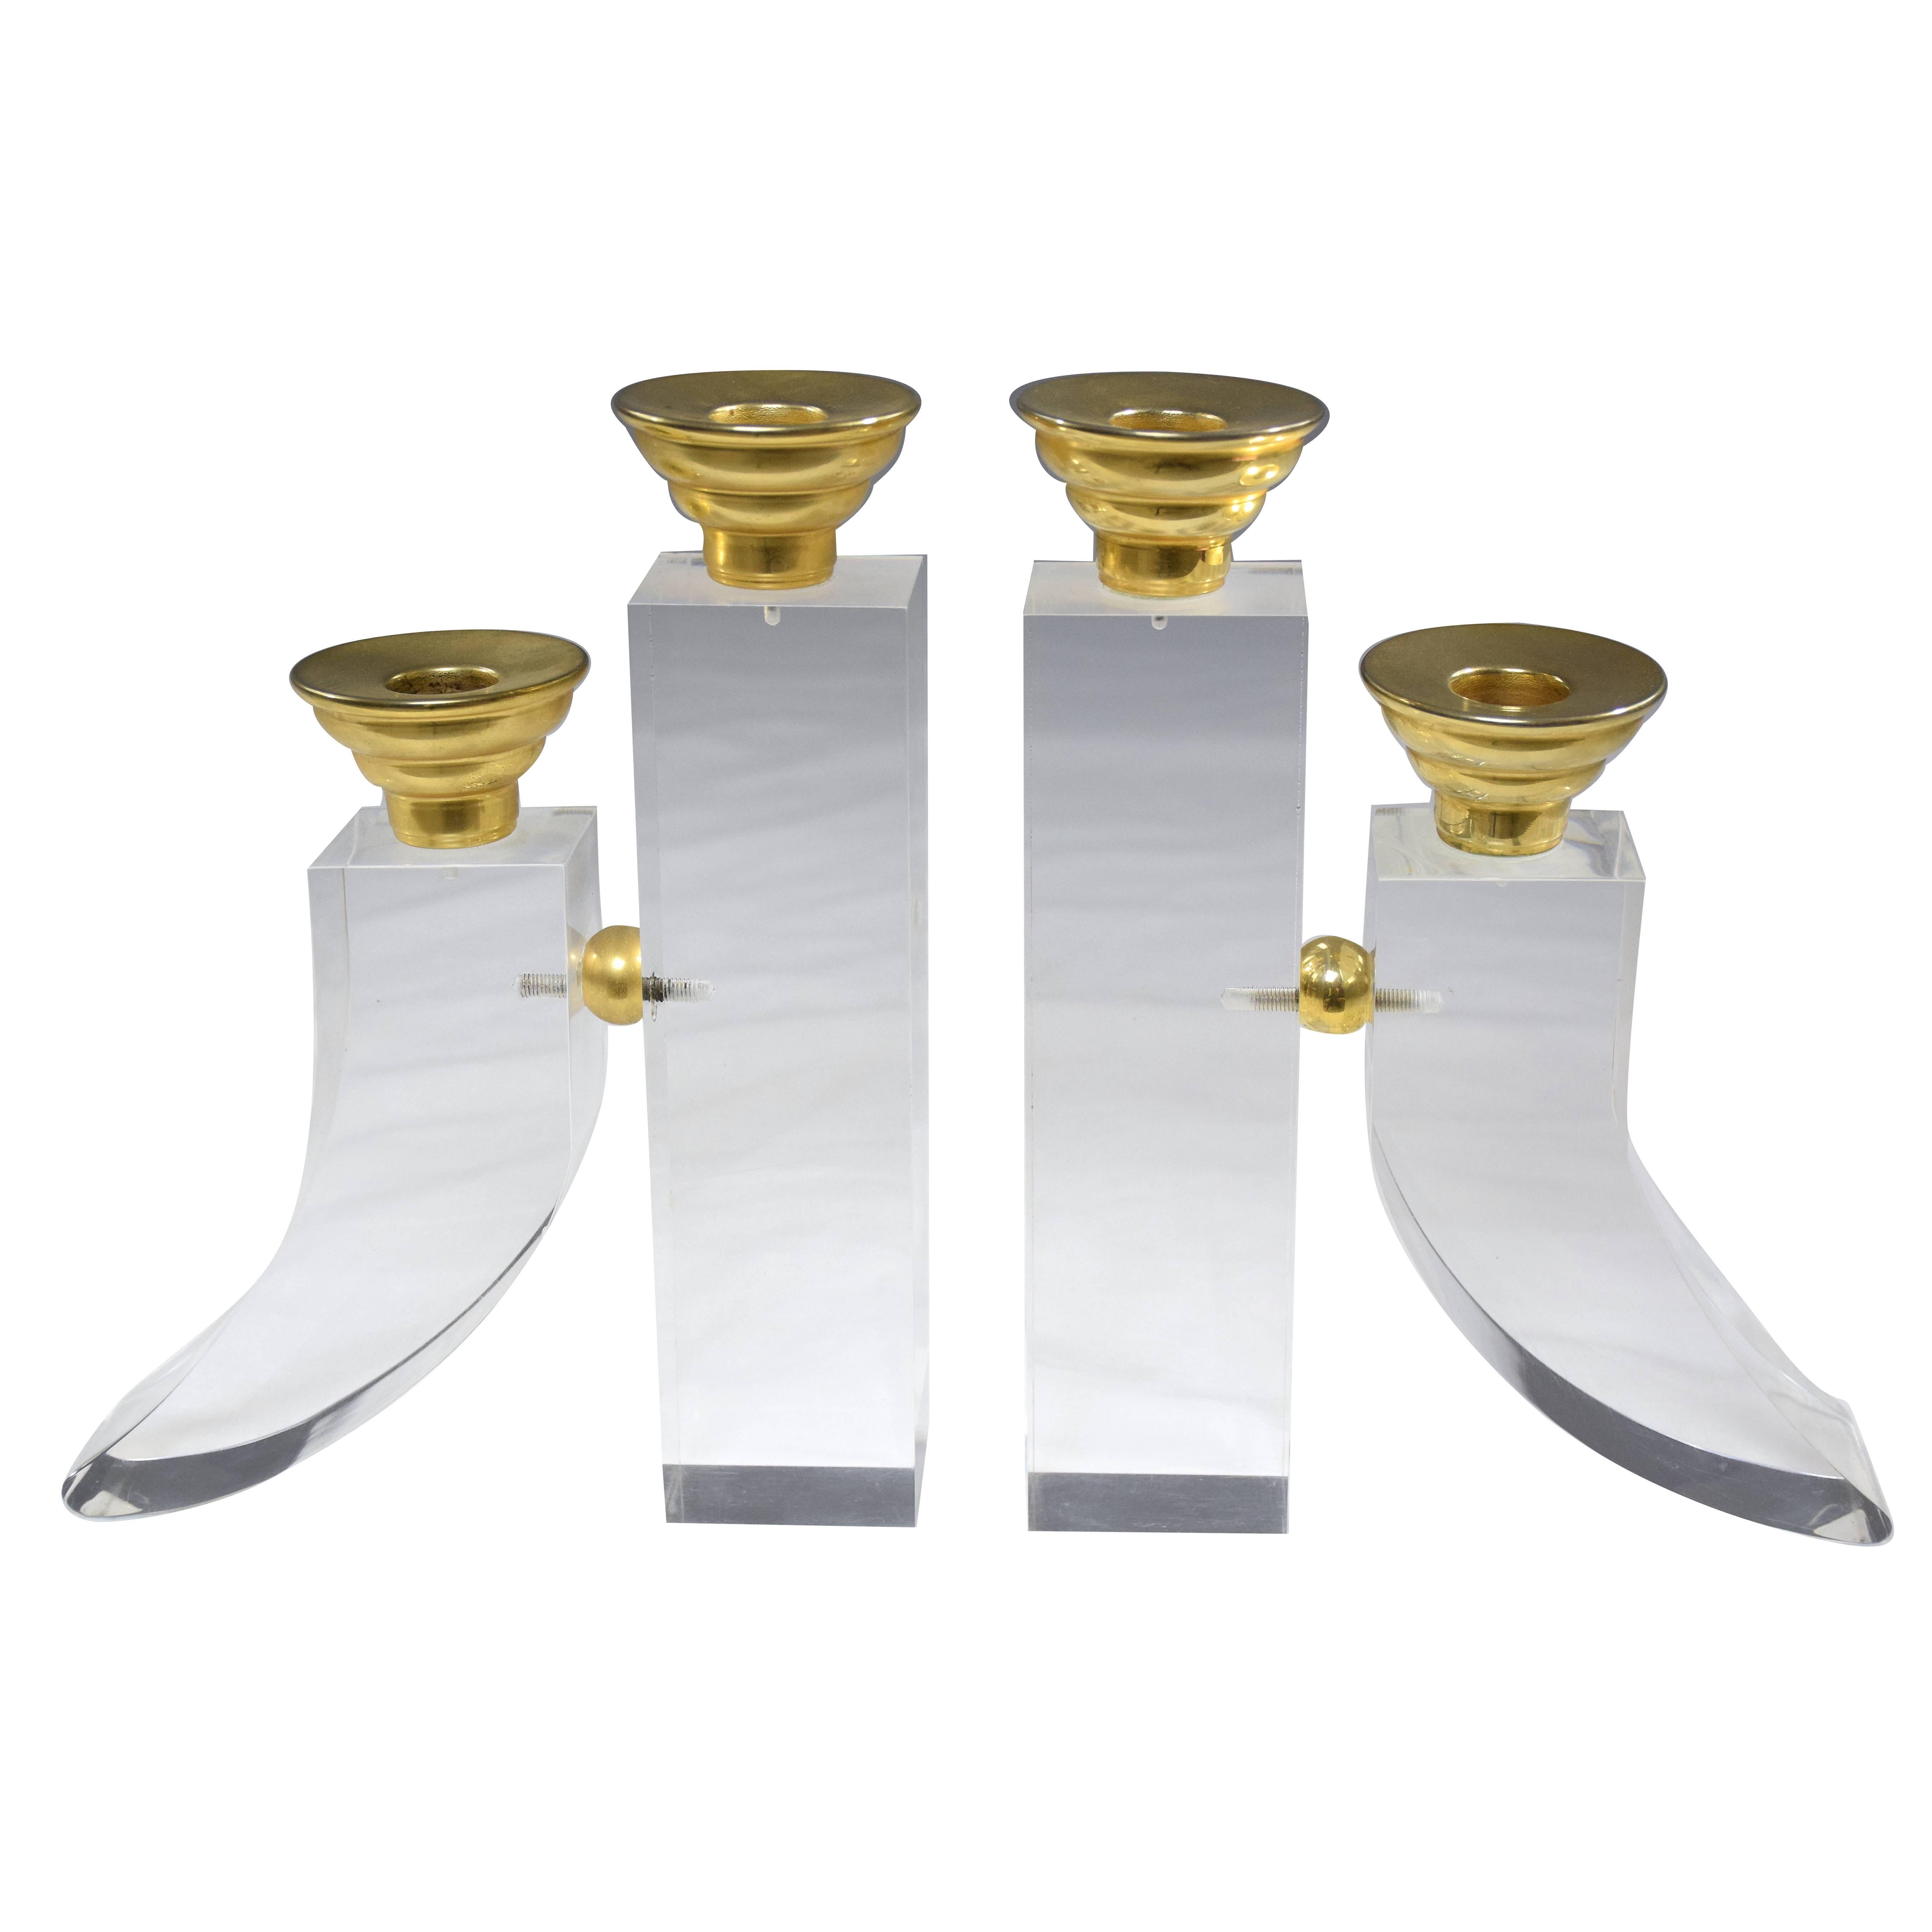 Pair of French 20th century vintage candleholders or candelabra each containing two candlestick holders set in curved block Plexiglas designs with polished brass details. The symmetrical styles are perfect for adding decorative allure to any living